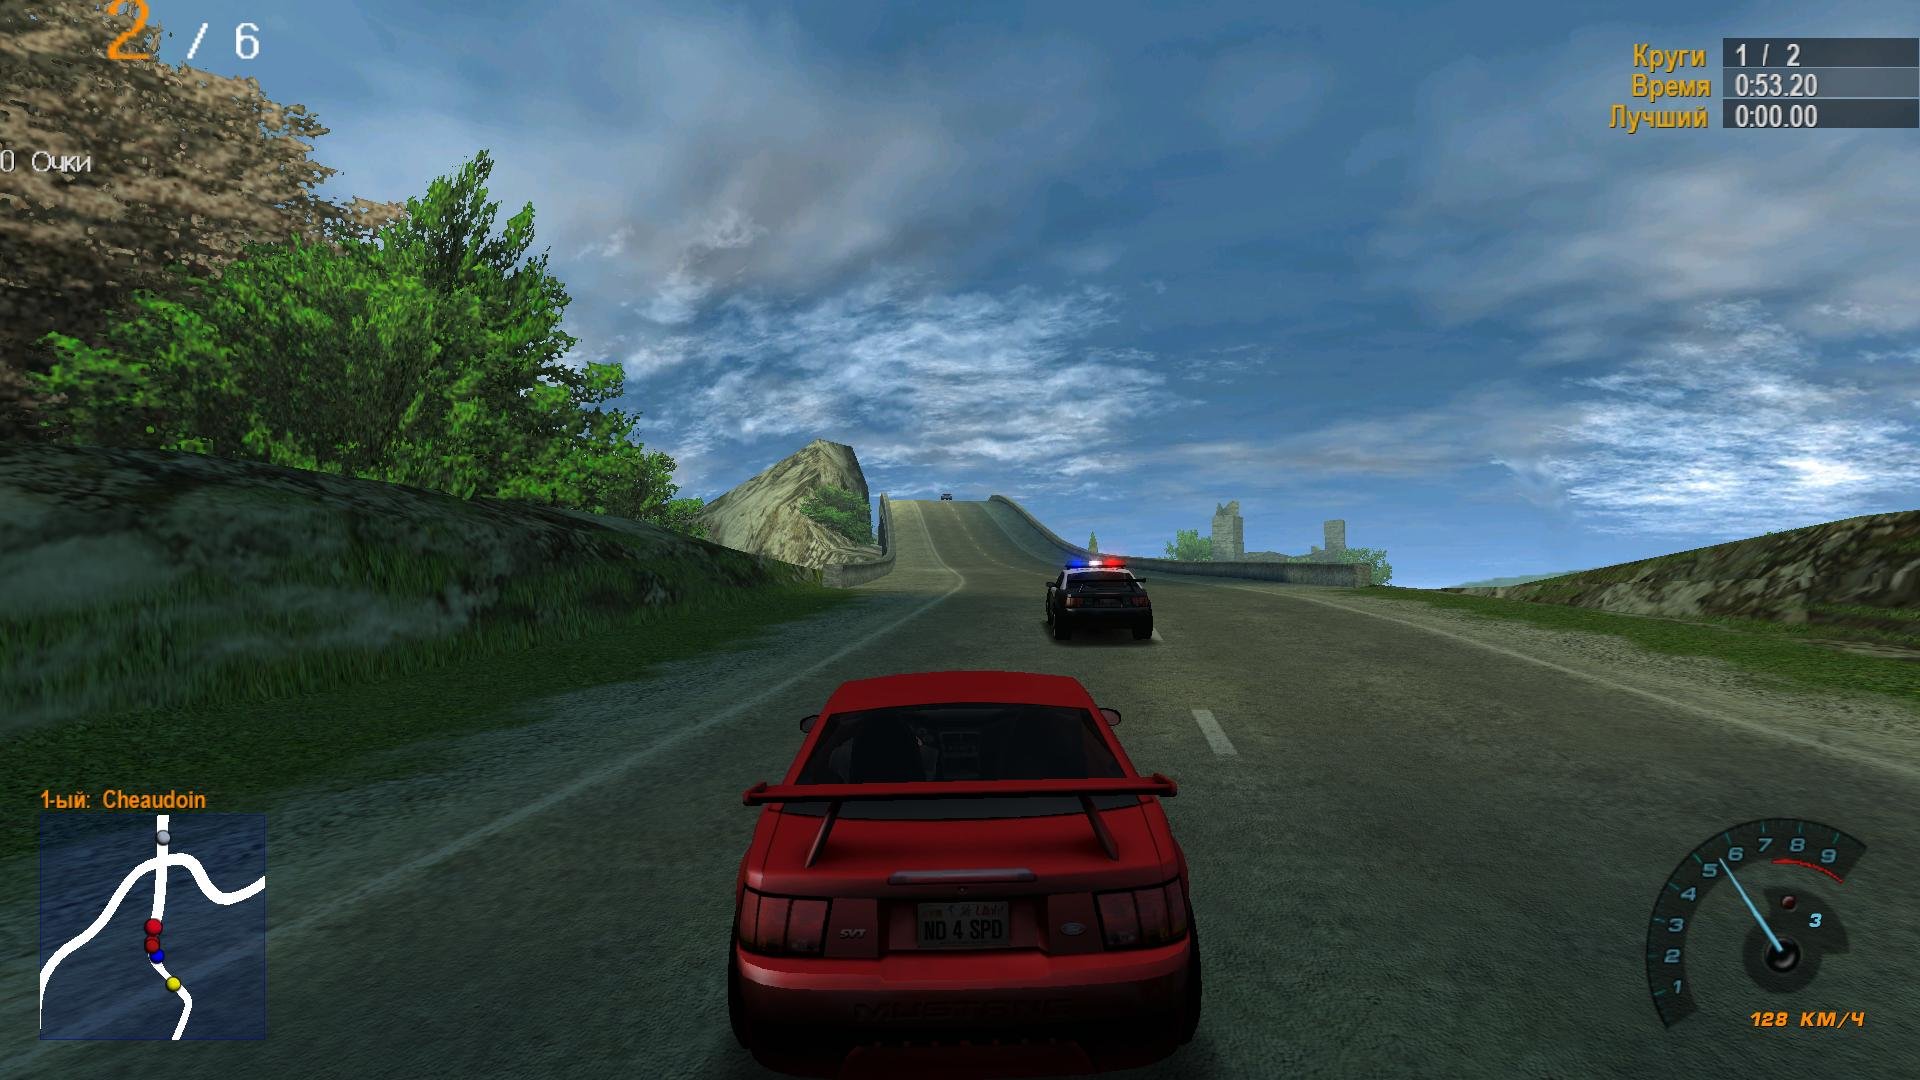 Скриншот 3 к игре Need for Speed: Hot Pursuit 2 PC (2002) RePack от Decepticon